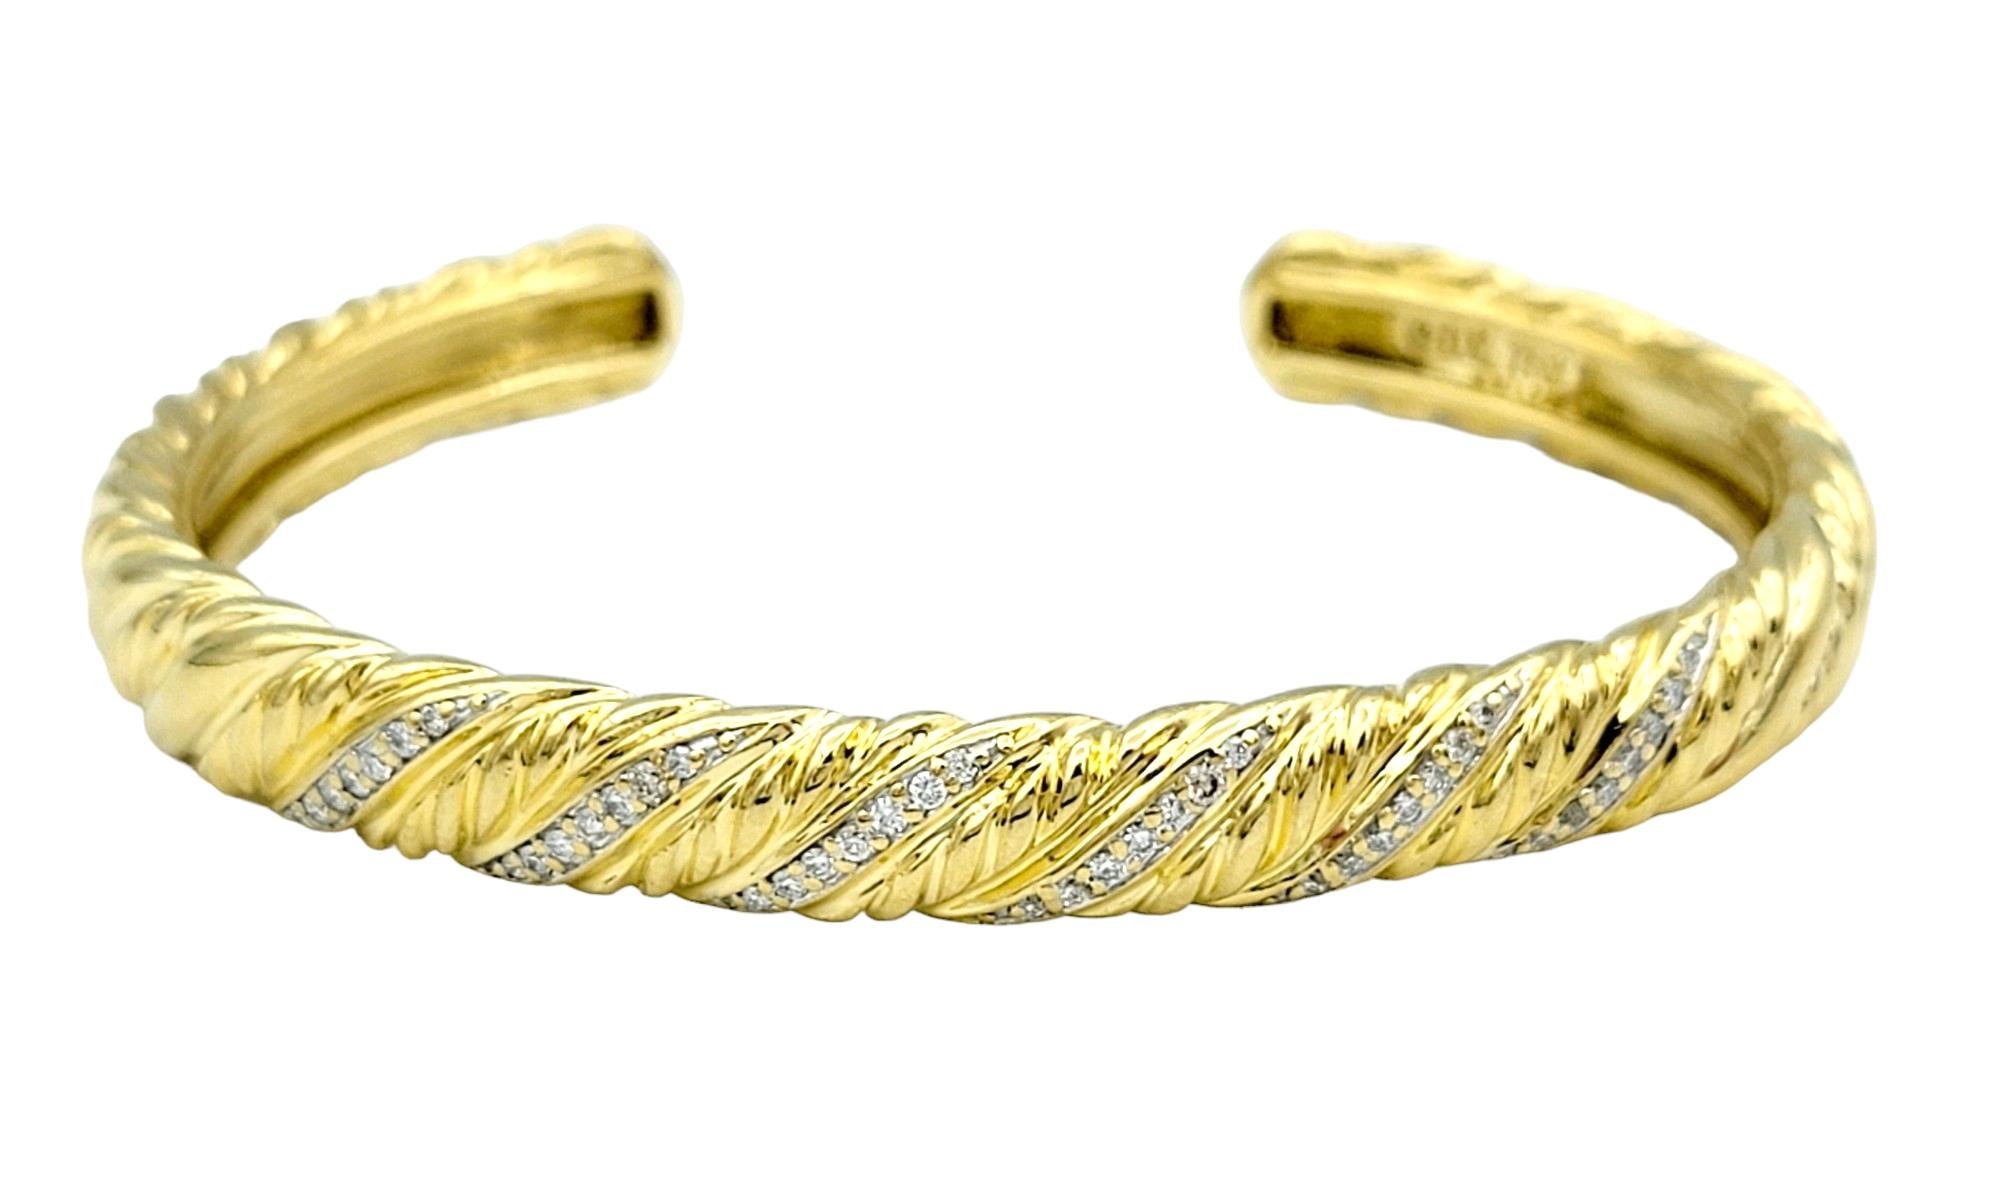 This stunning David Yurman diamond bangle bracelet, crafted in radiant 18 karat yellow gold, is a stunning testament to the brand's signature style and exquisite craftsmanship. Featuring a twisted design, the bracelet exudes a sense of original